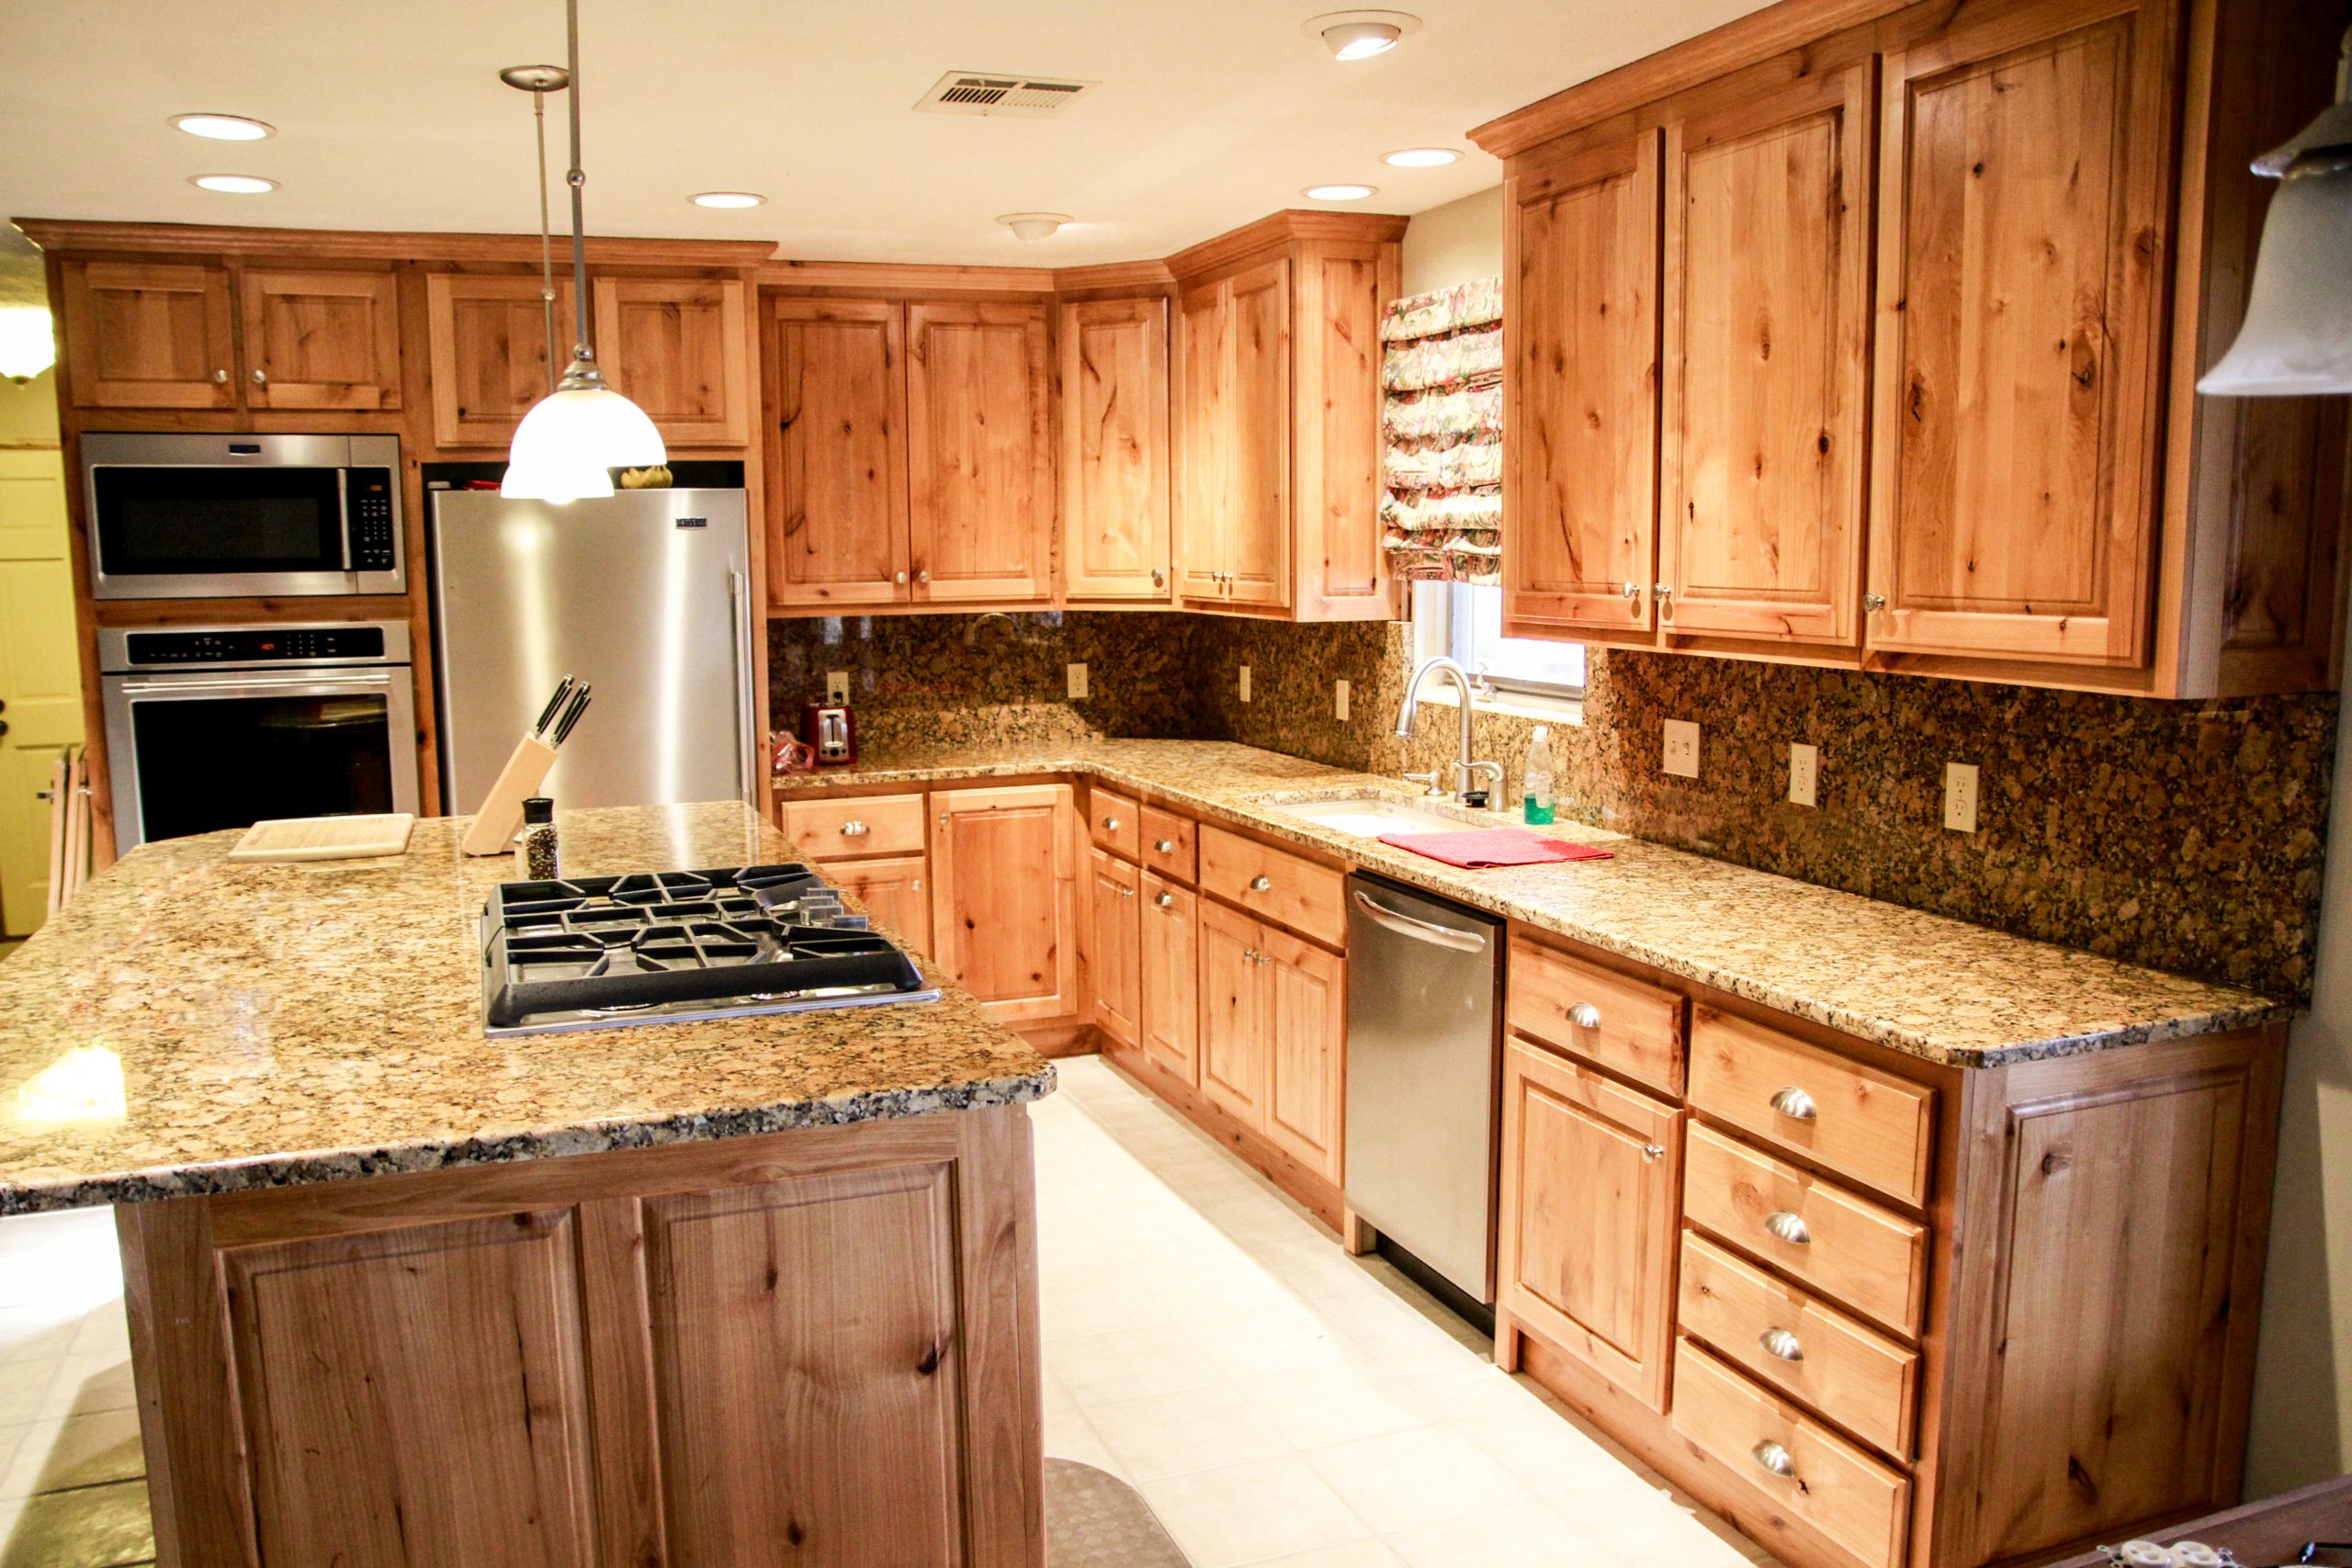 Farmhouse Kitchen Cabinets in Perrineville NJ, Buy custom kitchen cabinets factory direct in Perrineville NJ, Buy custom shaker cabinets factory direct in Perrineville NJ